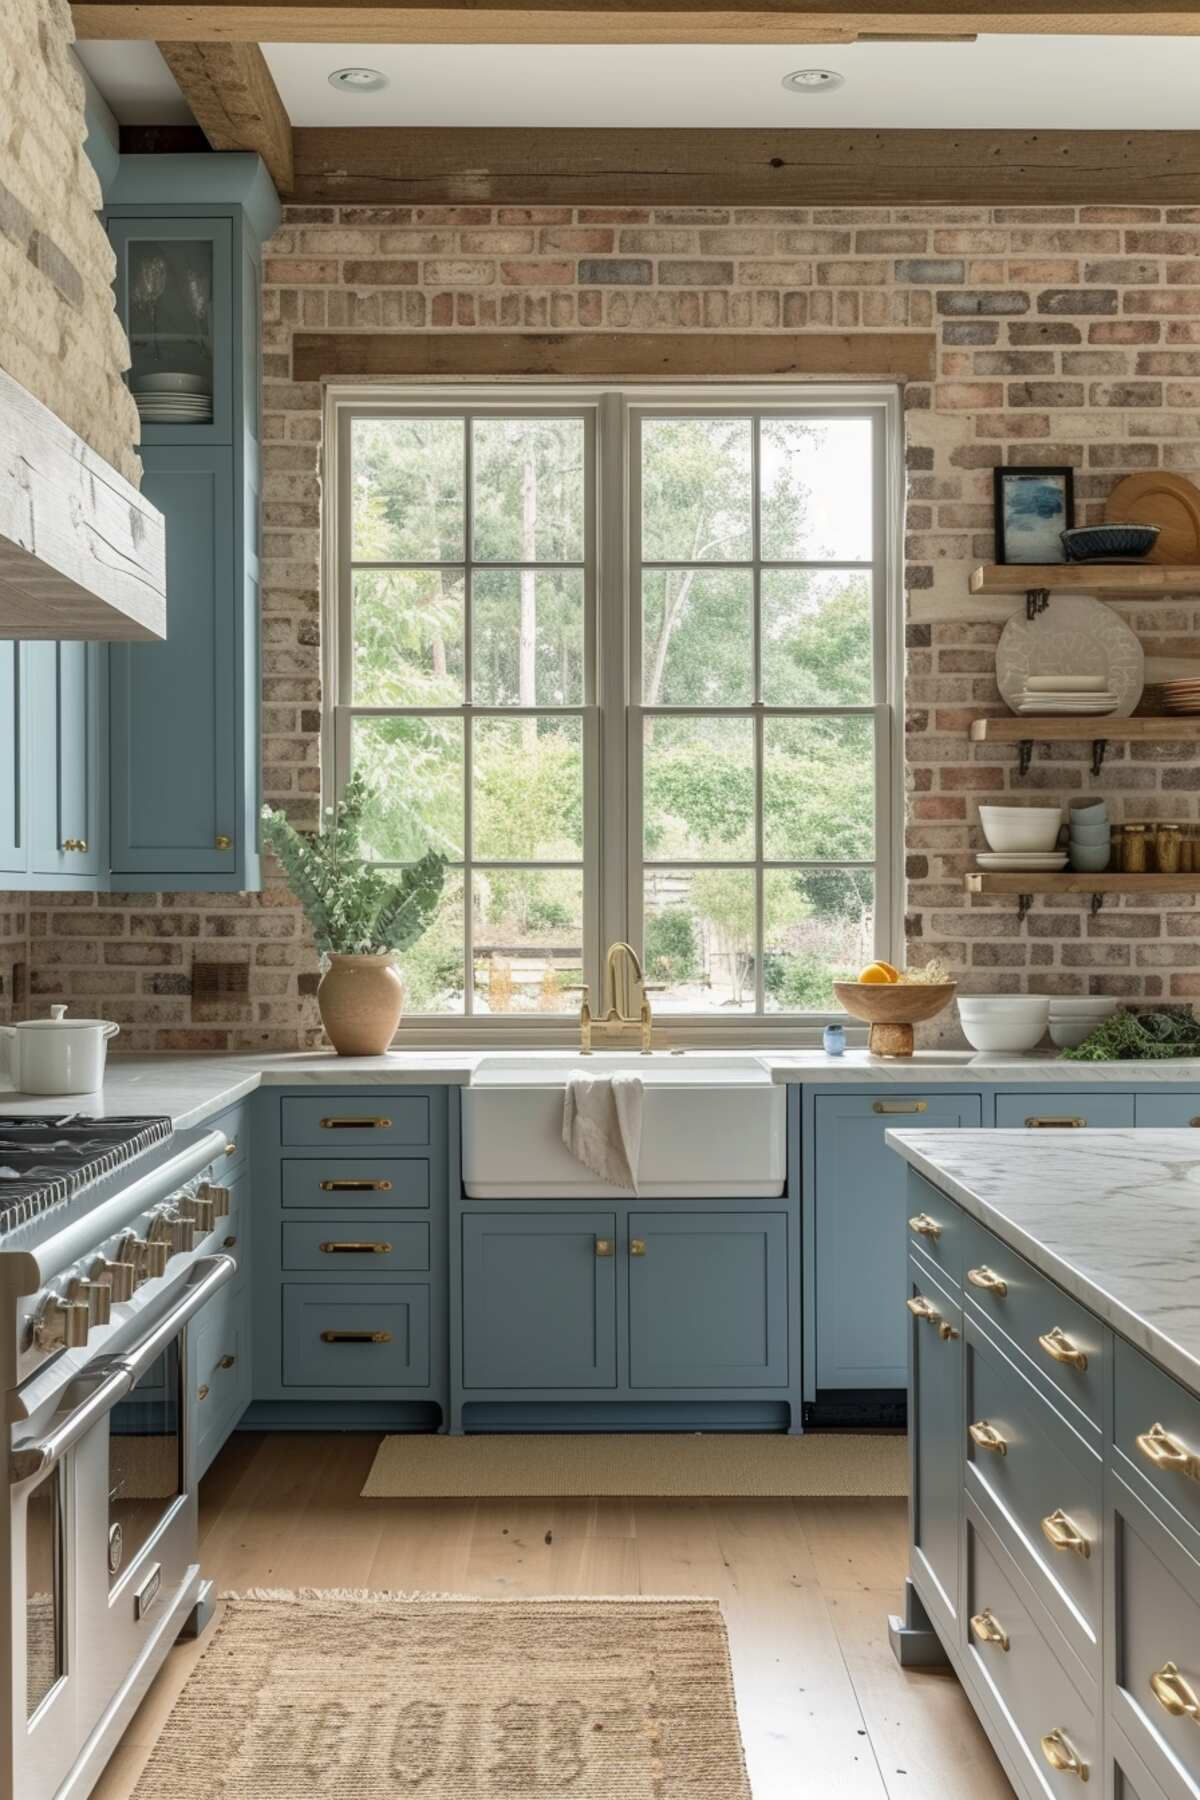 The Timeless Charm of Classic Kitchens